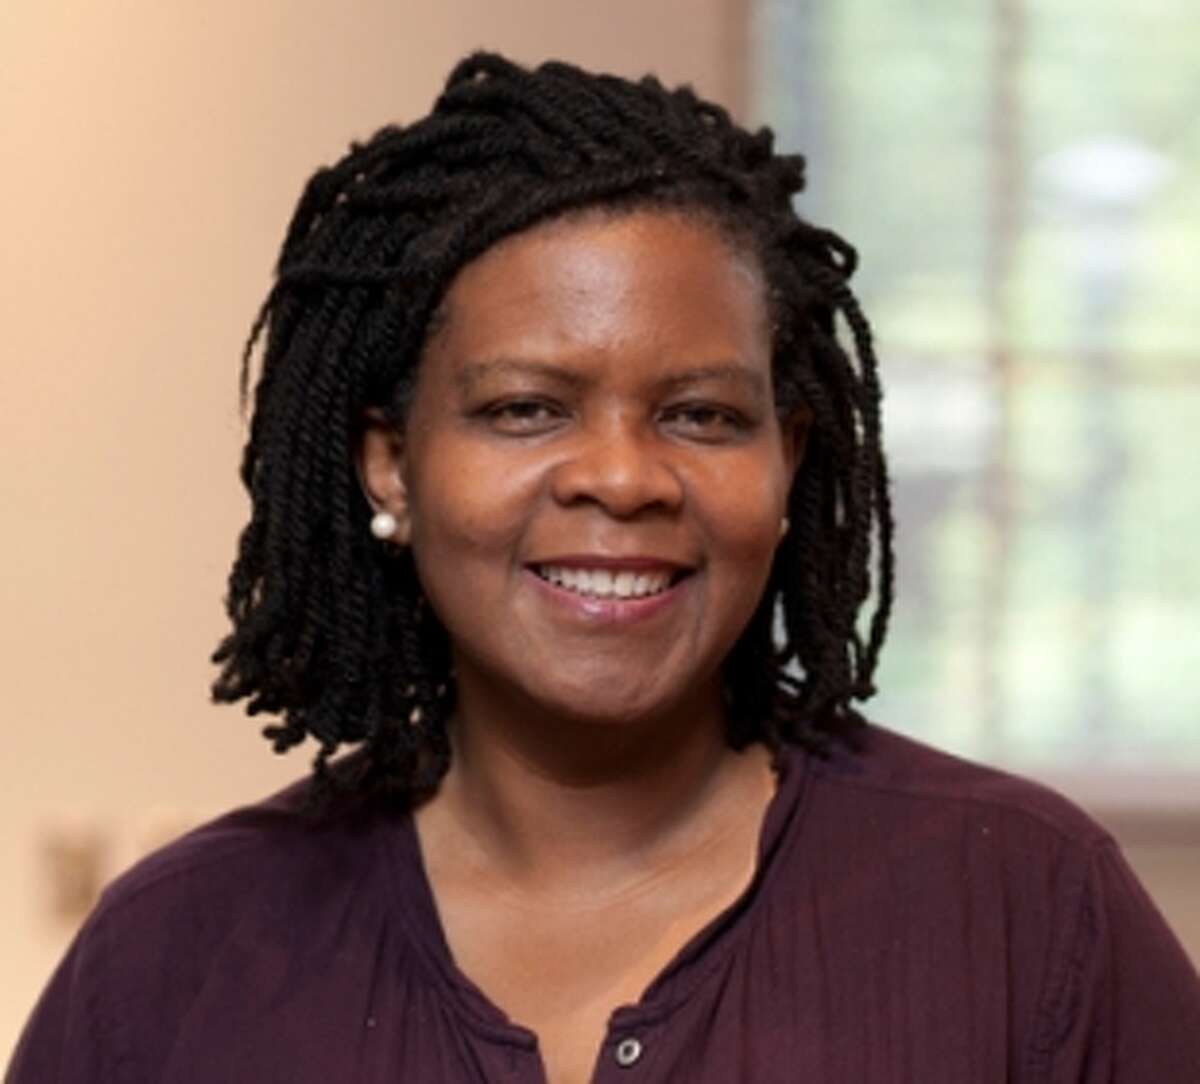 Annette Gordon-Reed is a professor of history and law at Harvard and the author of the Pulitzer Prize-winning book “The Hemingses of Monticello.”